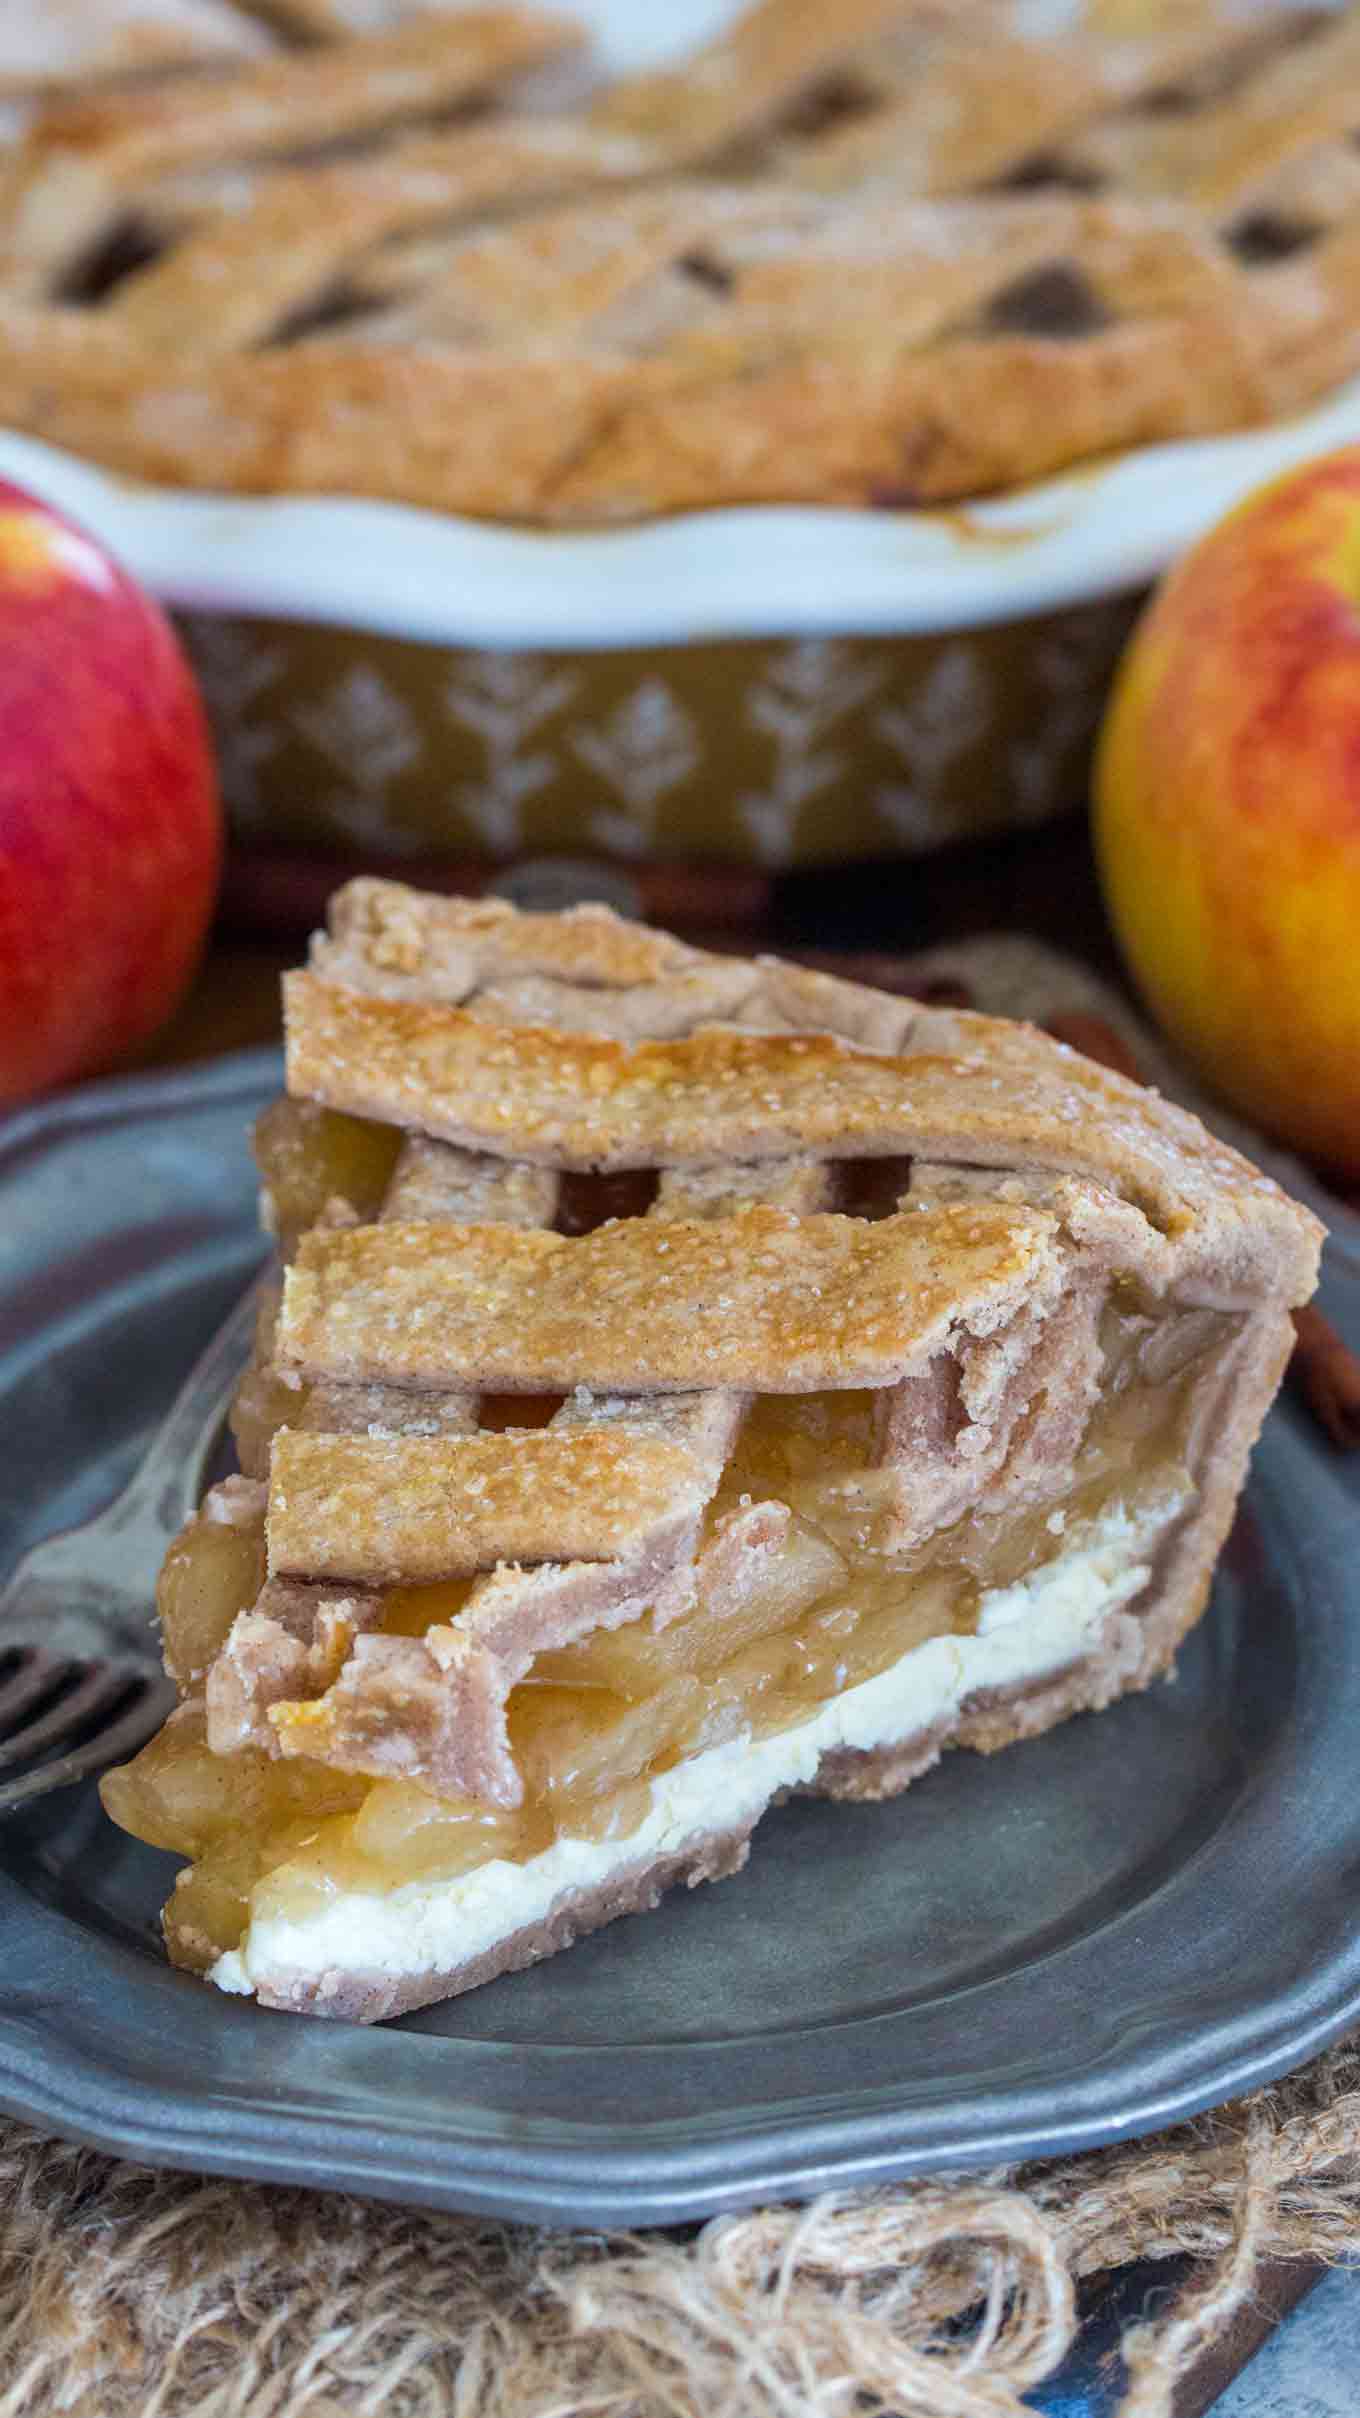 Best Apple Pie Recipe Easy And Homemade [video] Sweet And Savory Meals